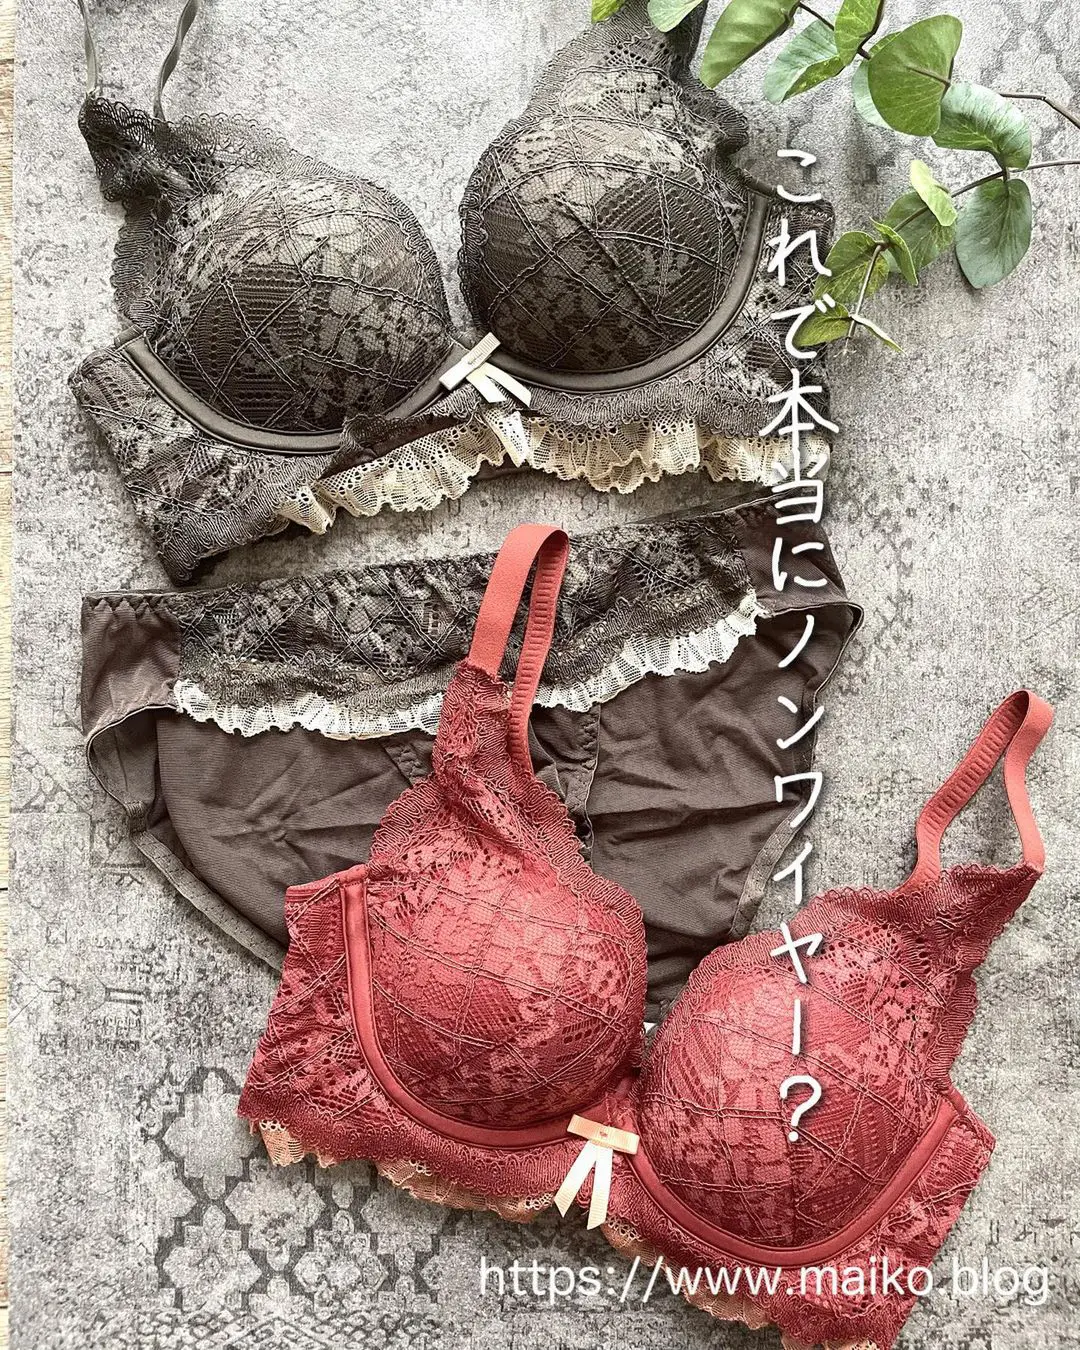 Should You Buy A Bra Without Trying It On First? - ParfaitLingerie.com -  Blog